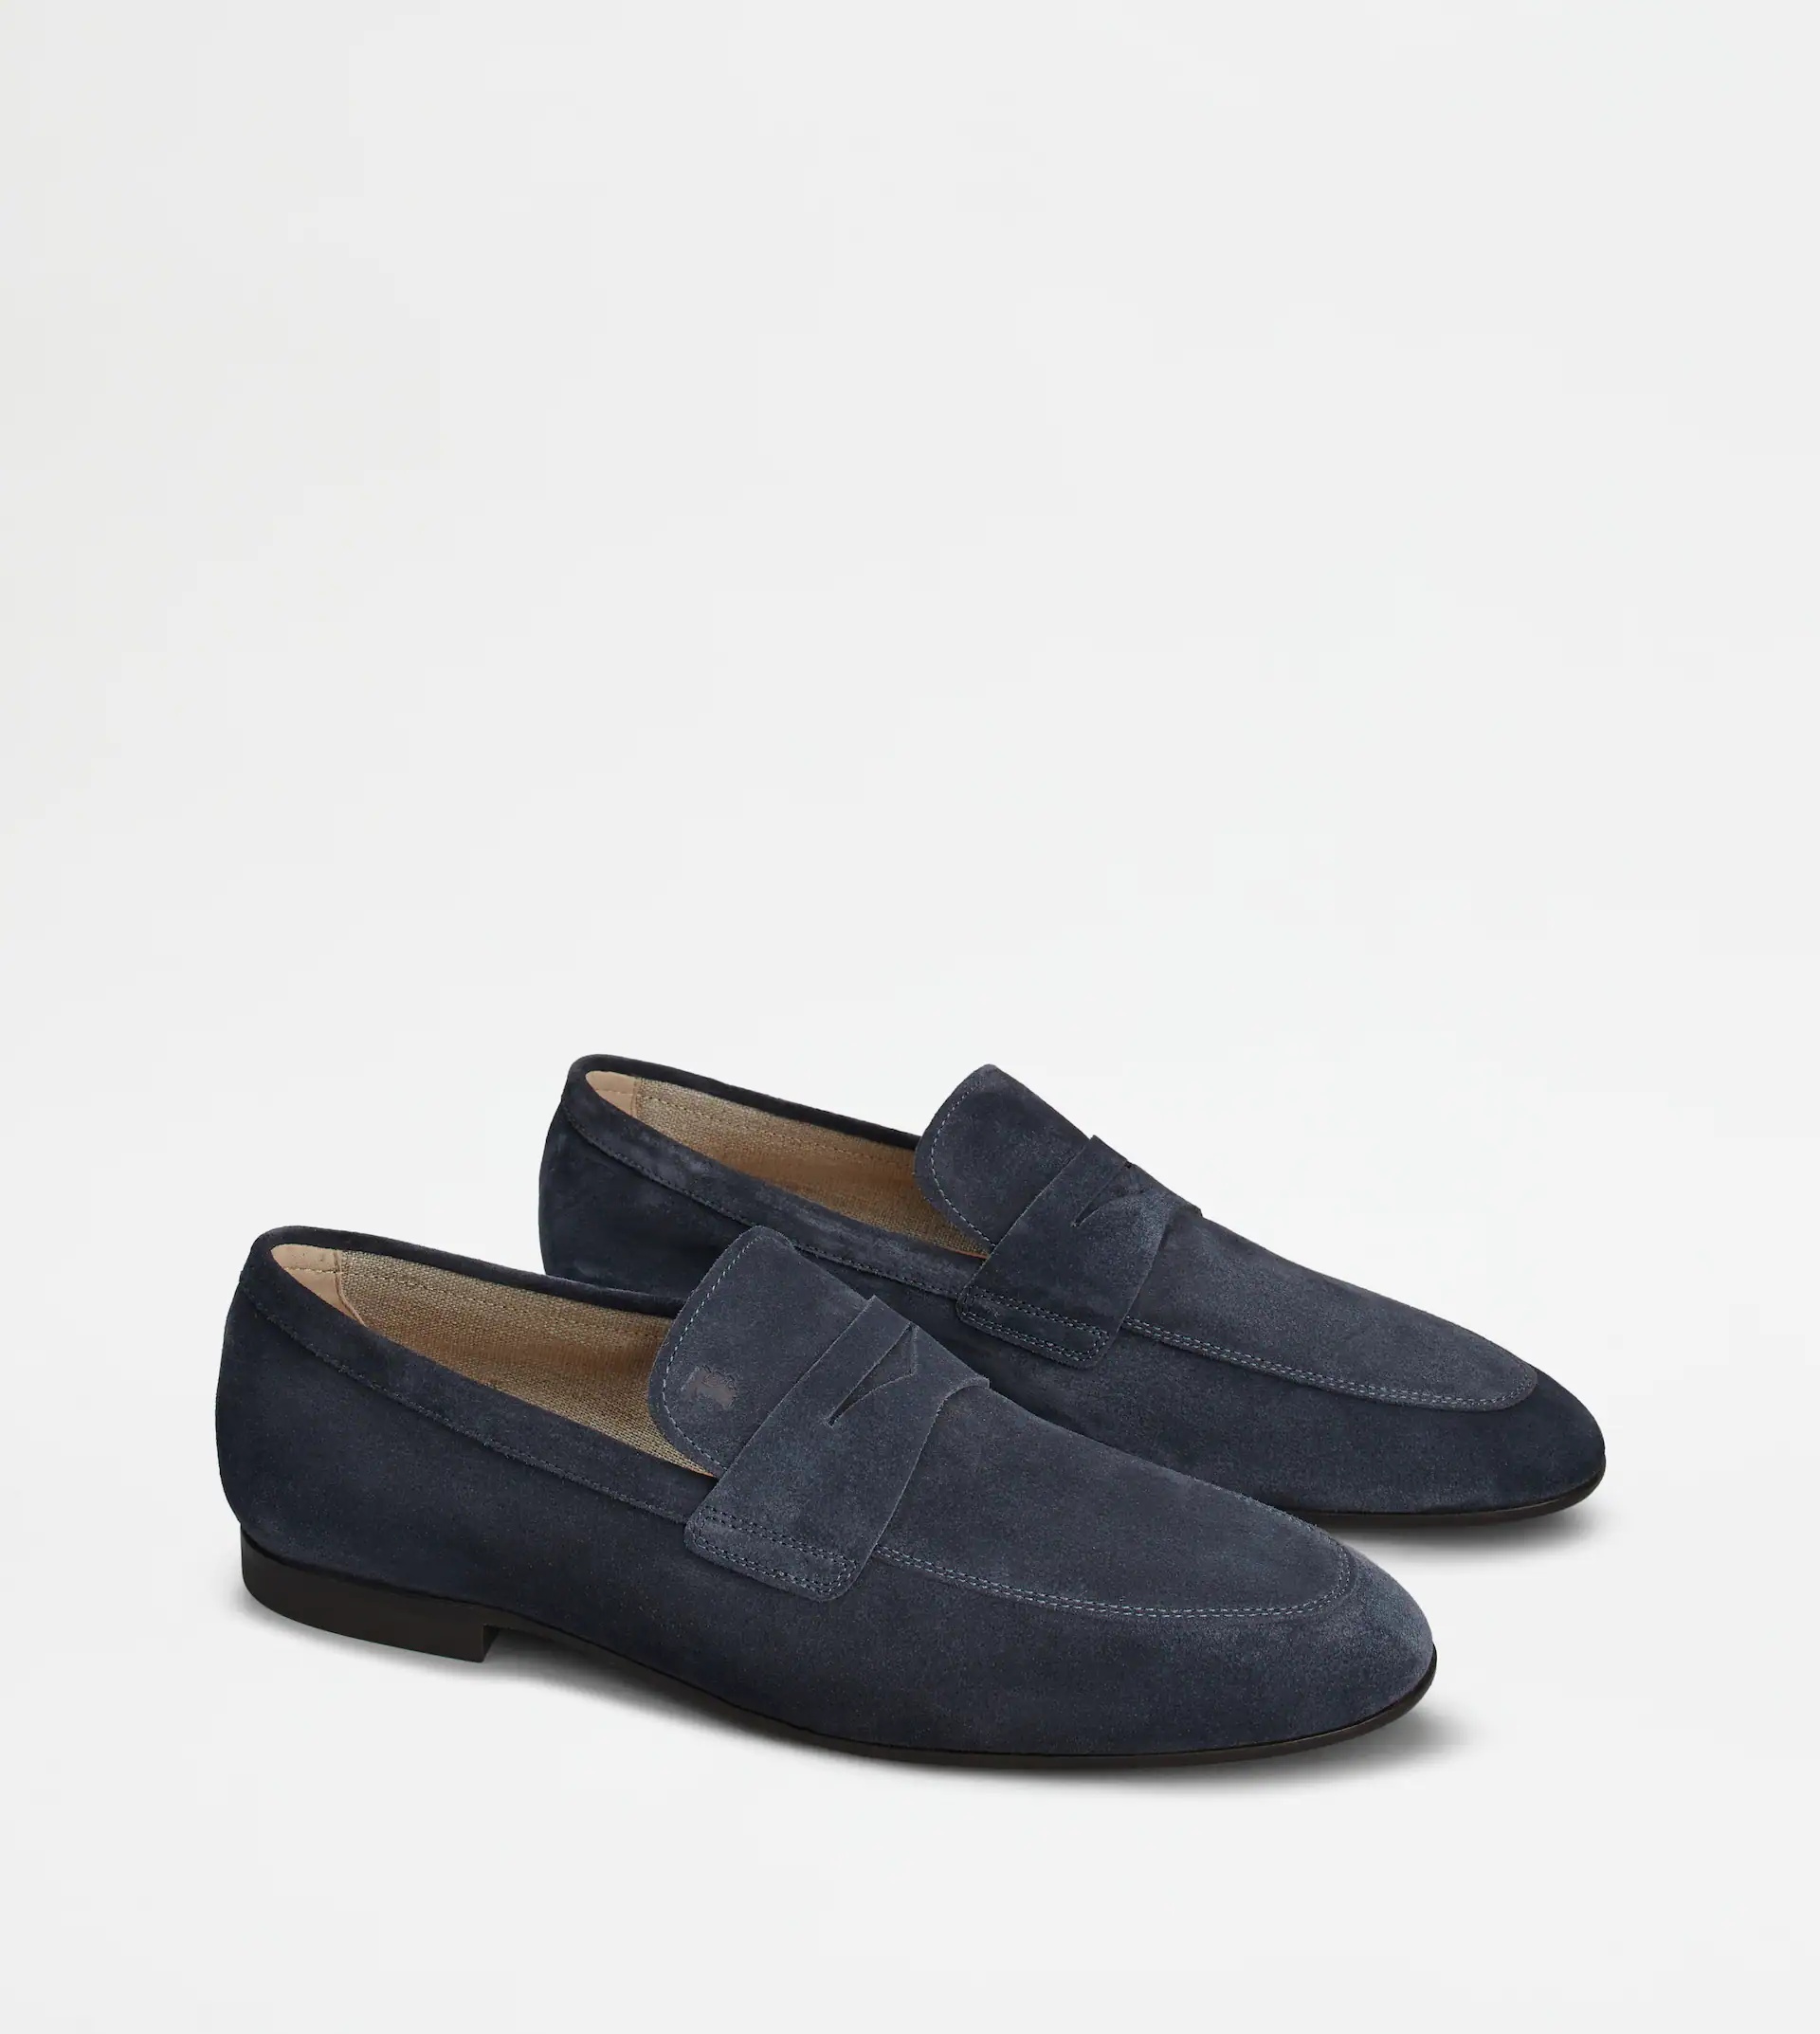 TOD'S LOAFERS IN SUEDE - BLUE - 3